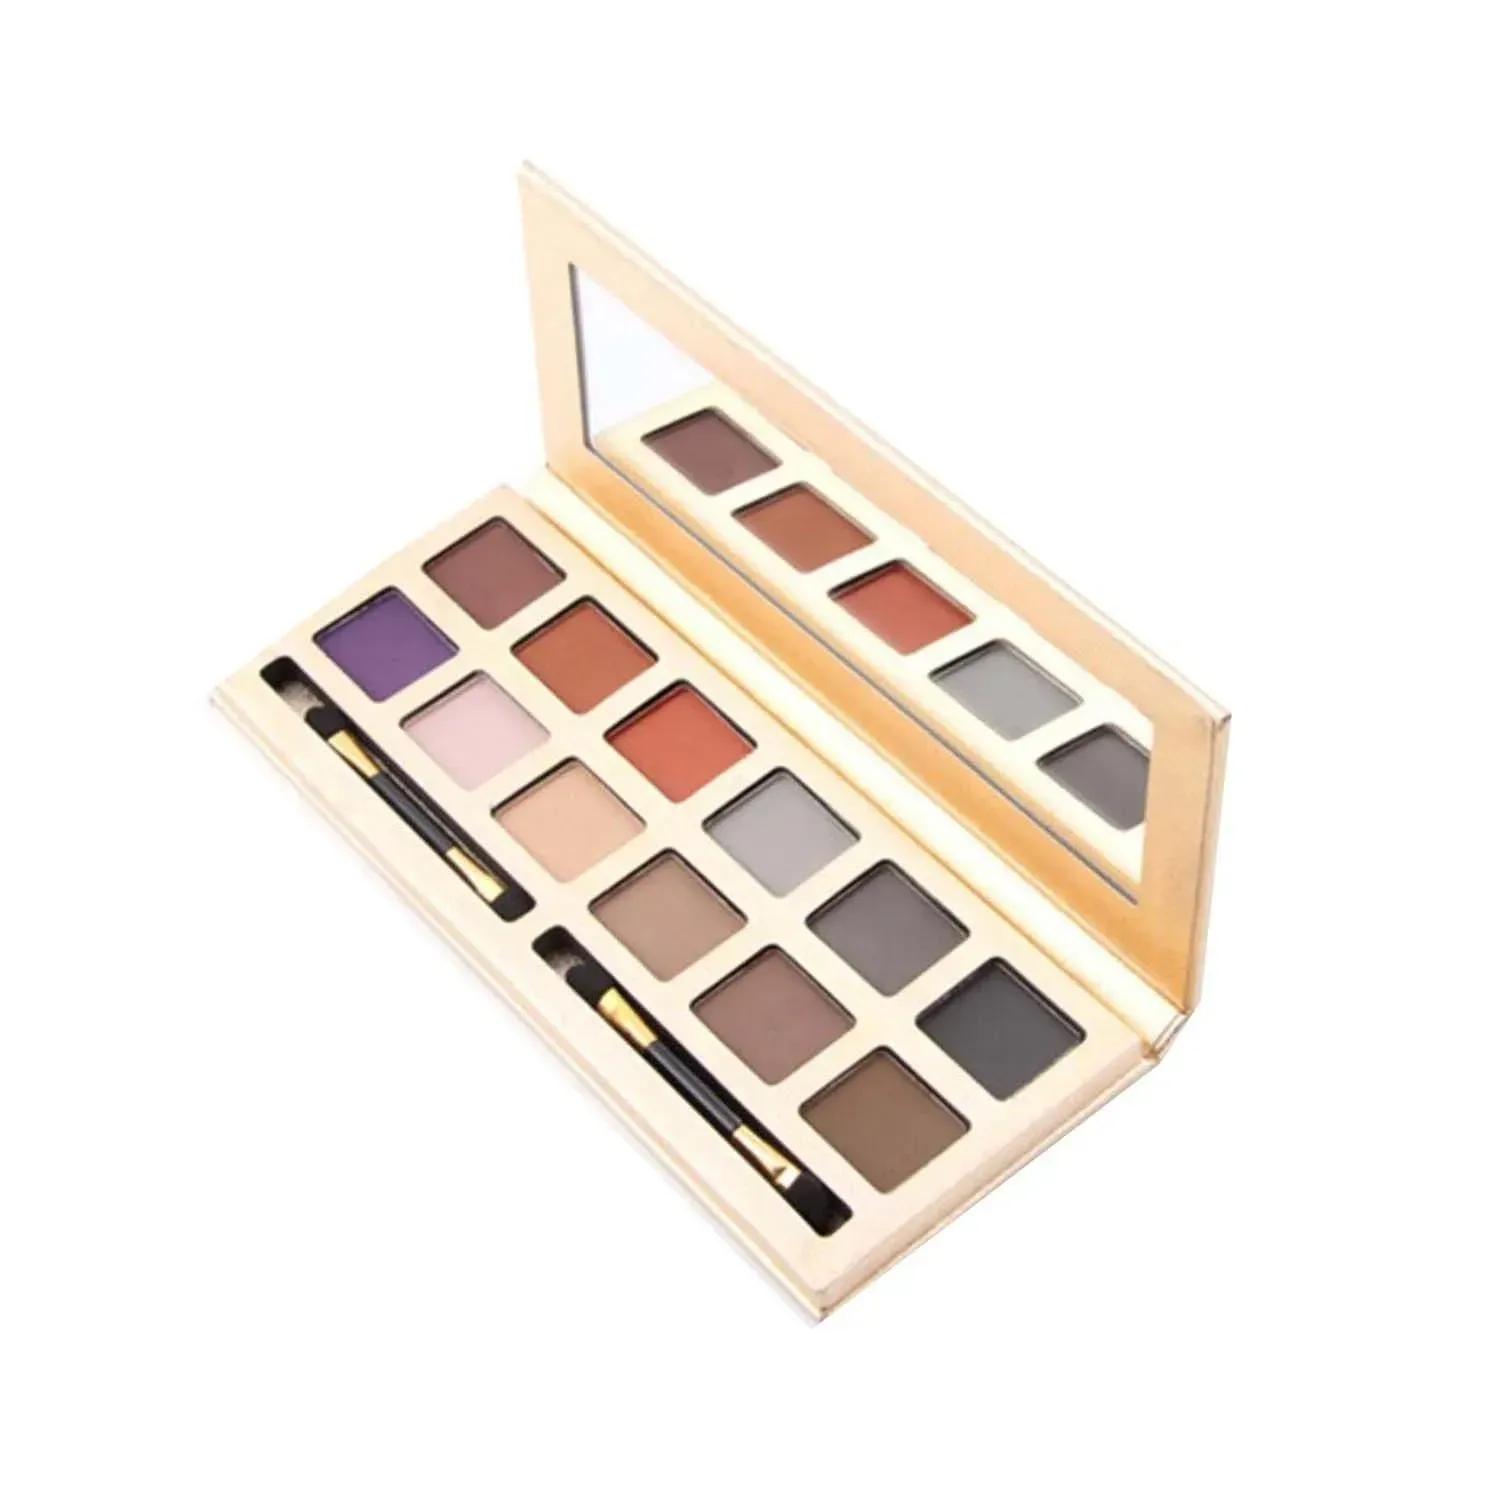 miss rose 12 color nude eyeshadow palette - ny2 (20g)